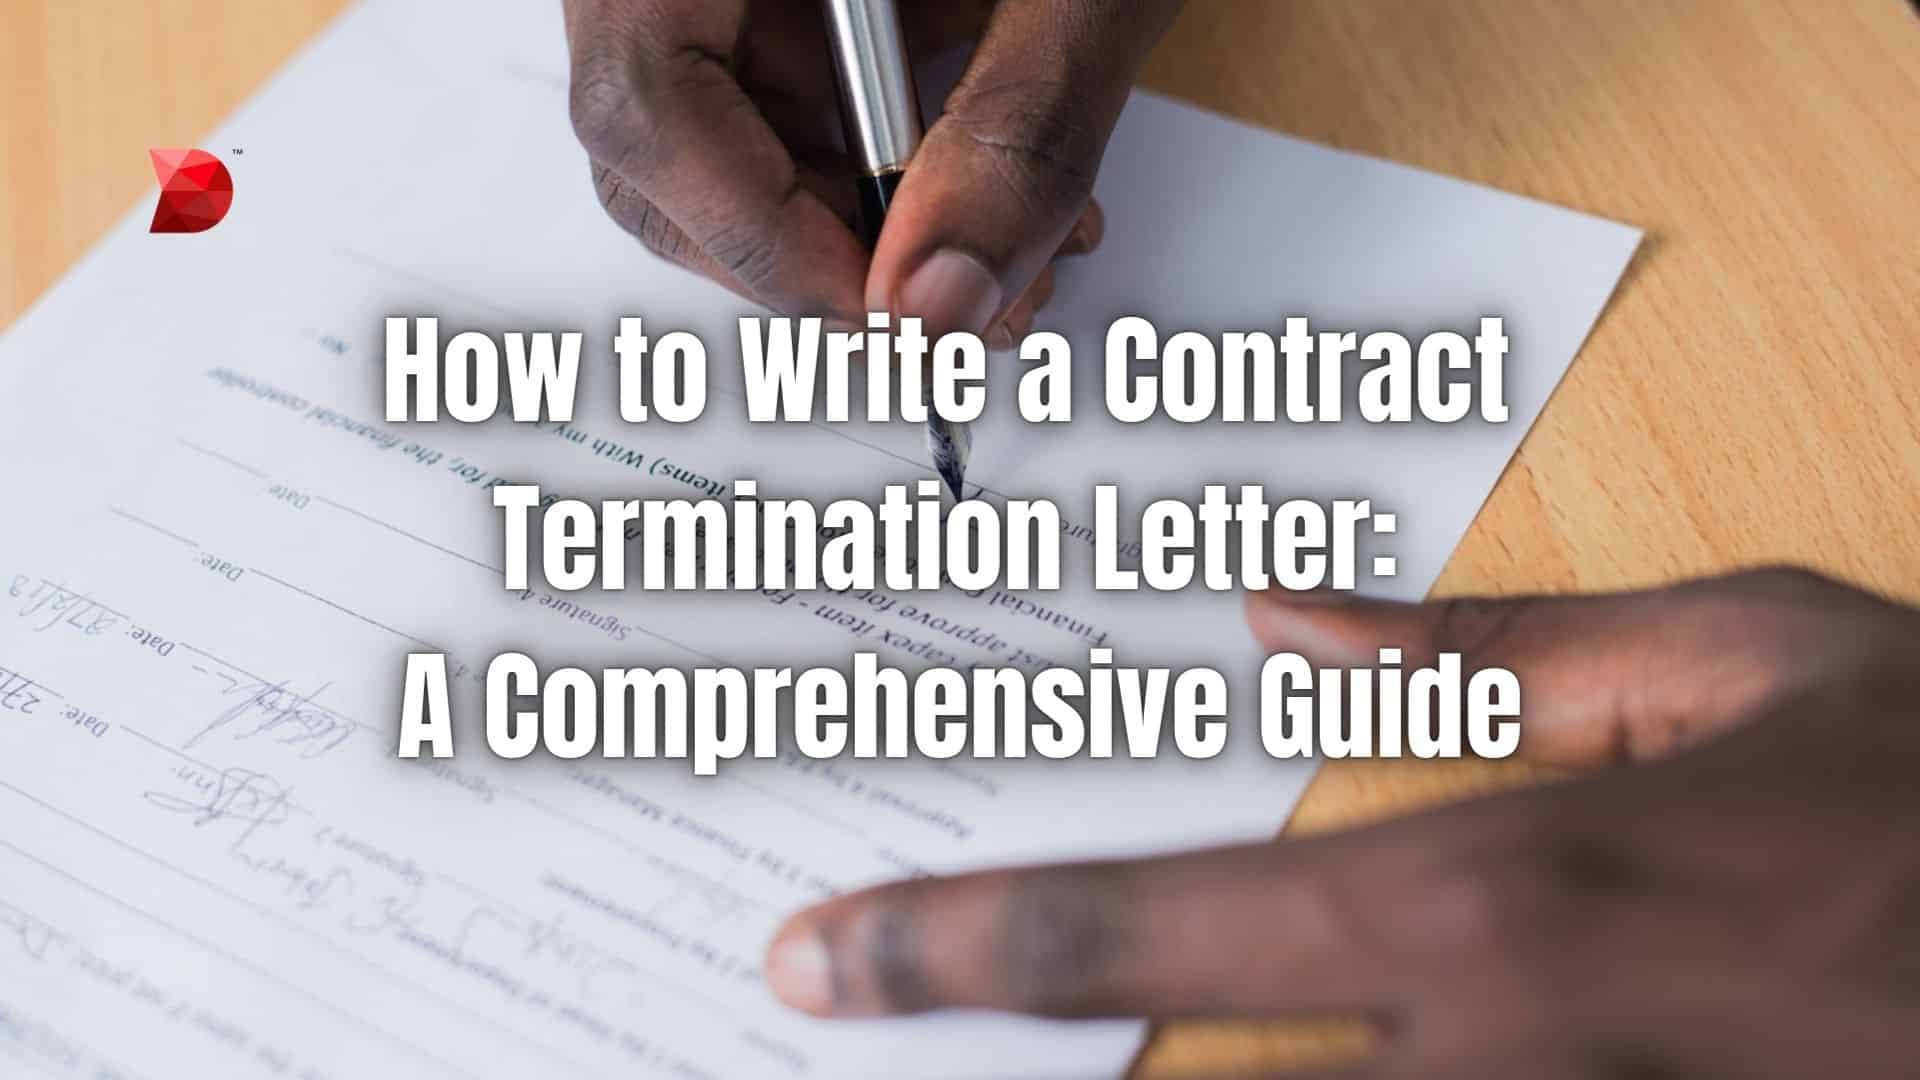 How to Write a Contract Termination Letter A Comprehensive Guide